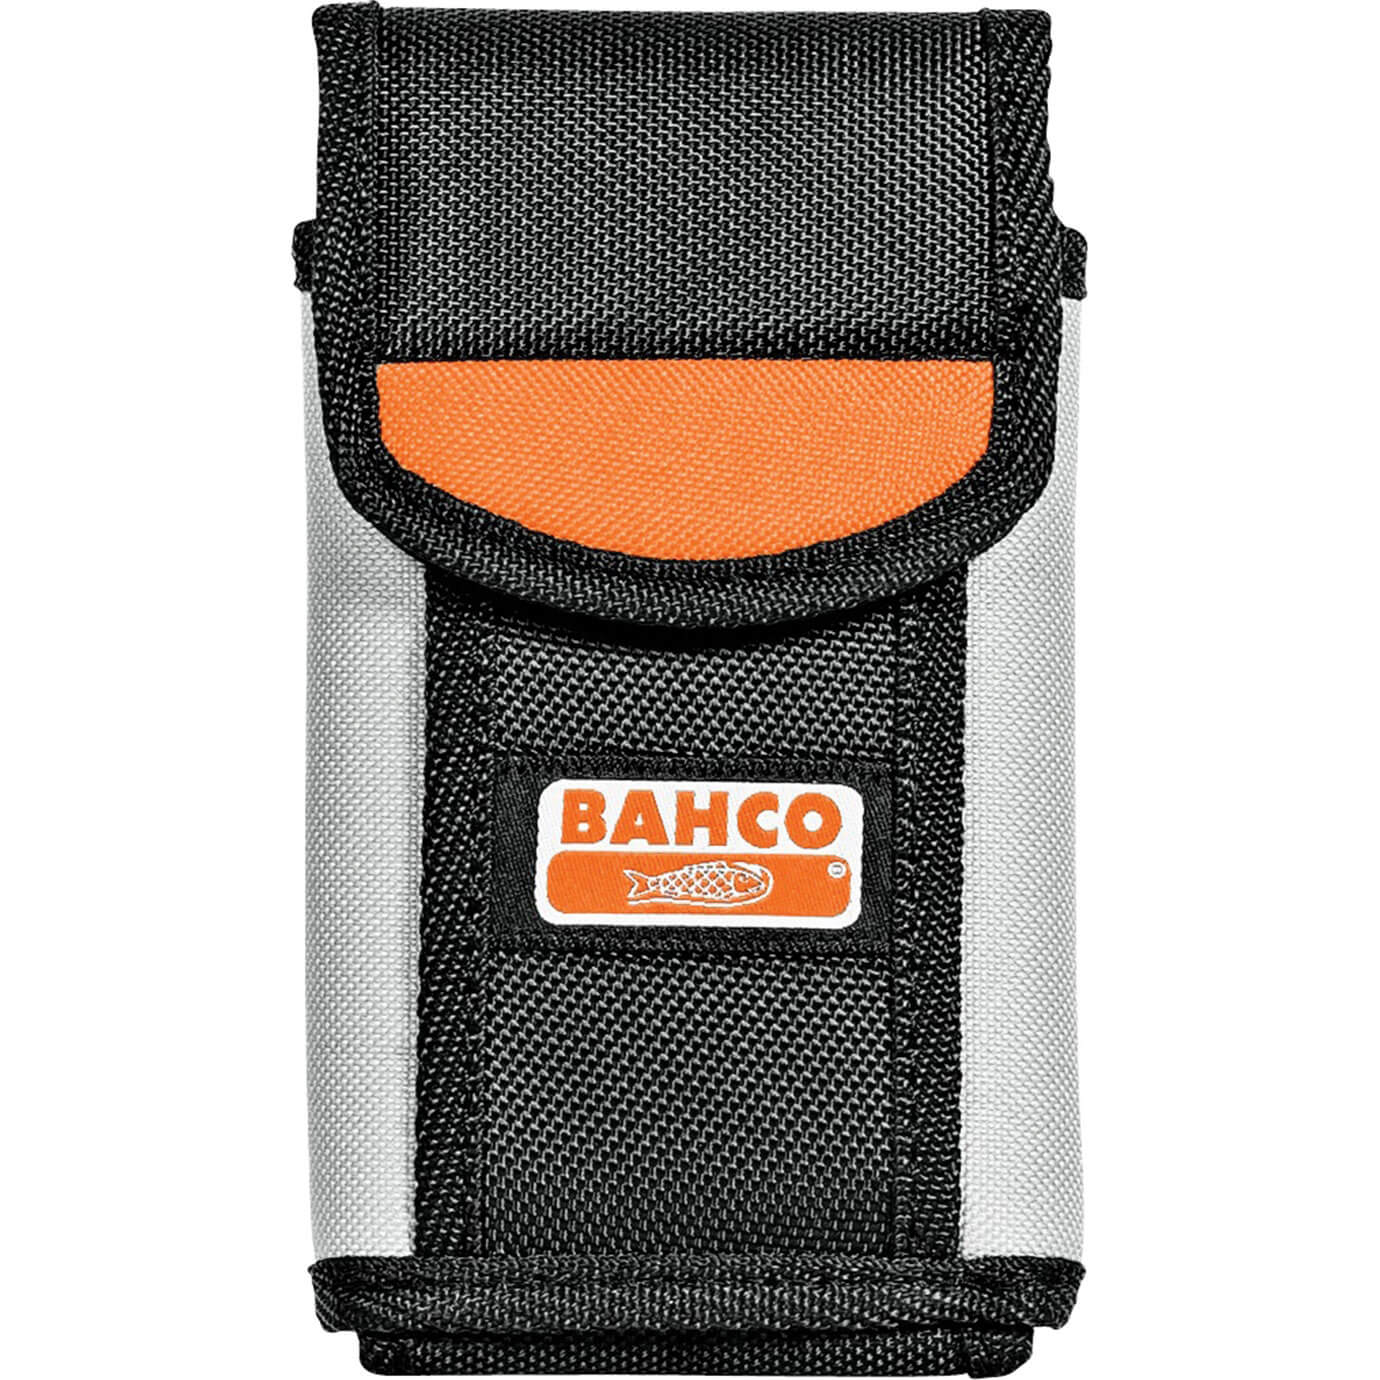 Bahco Mobile Phone Holder